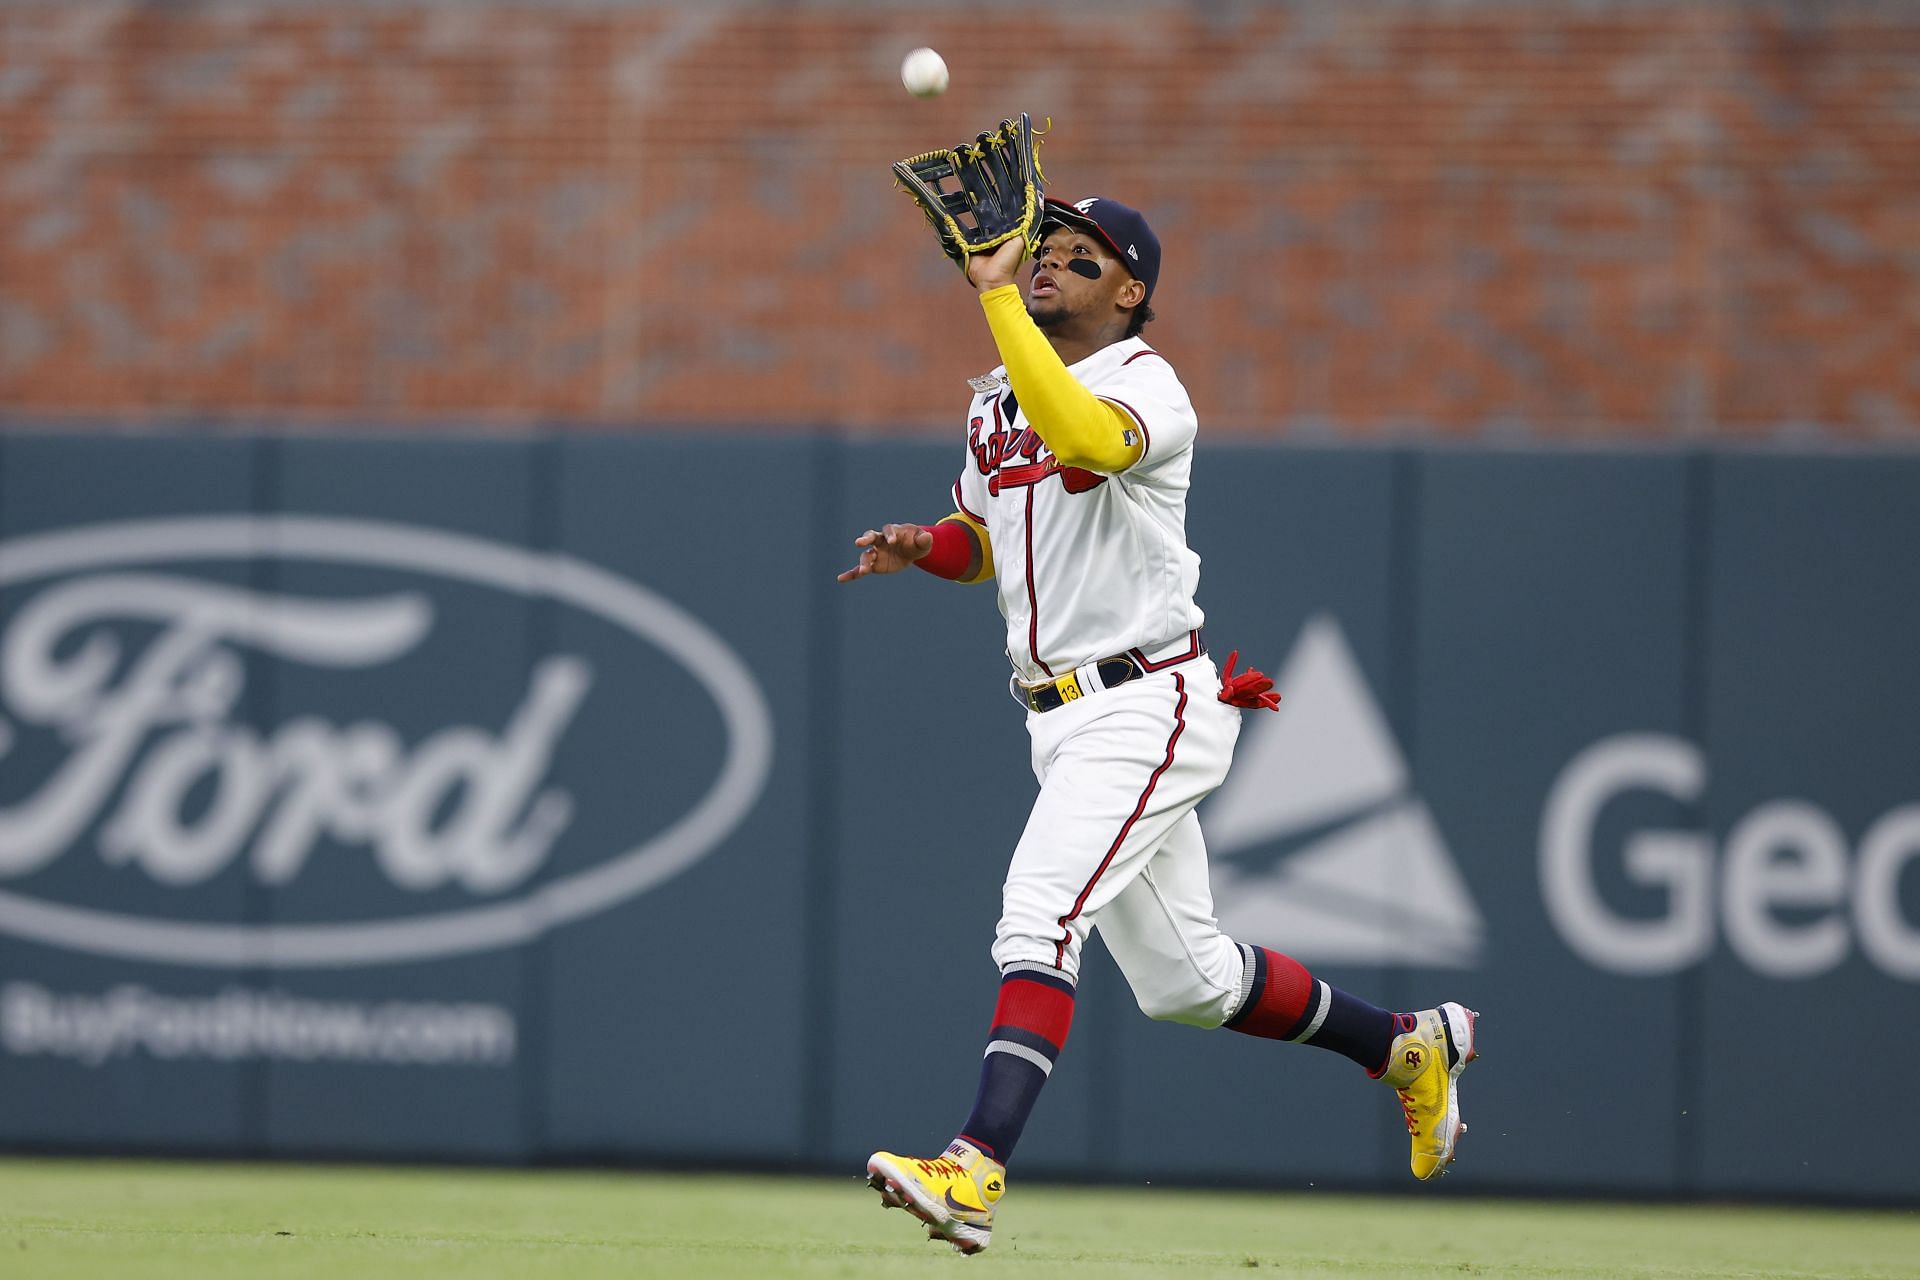 Ronald Acuna Jr. of the Atlanta Braves catches a fly ball against the San Francisco Giants.